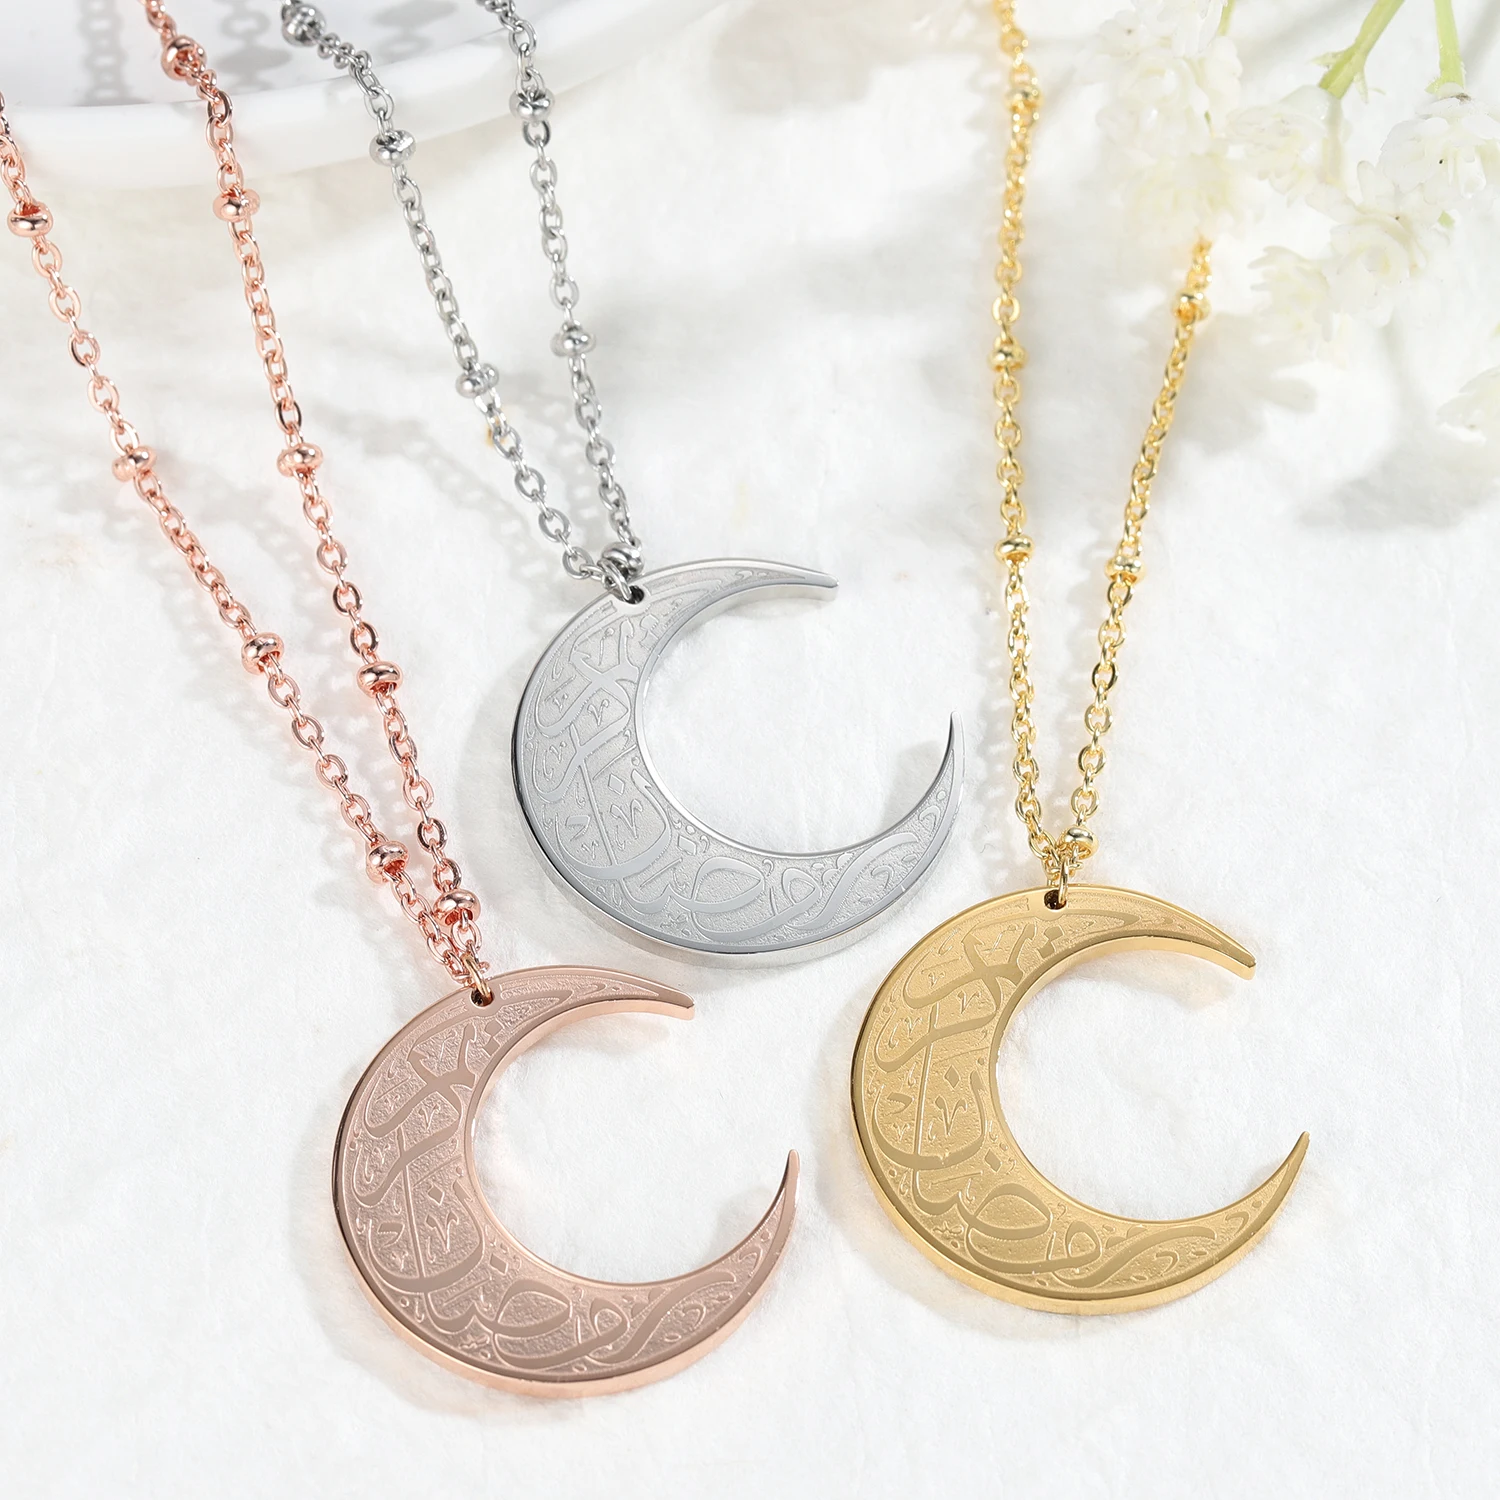 CRESCENT MOON NECKLACE Custom Arabic Name Pendant for Women Gold Stainless Steel God Messager Islamic Quran Jewelry Gift Men